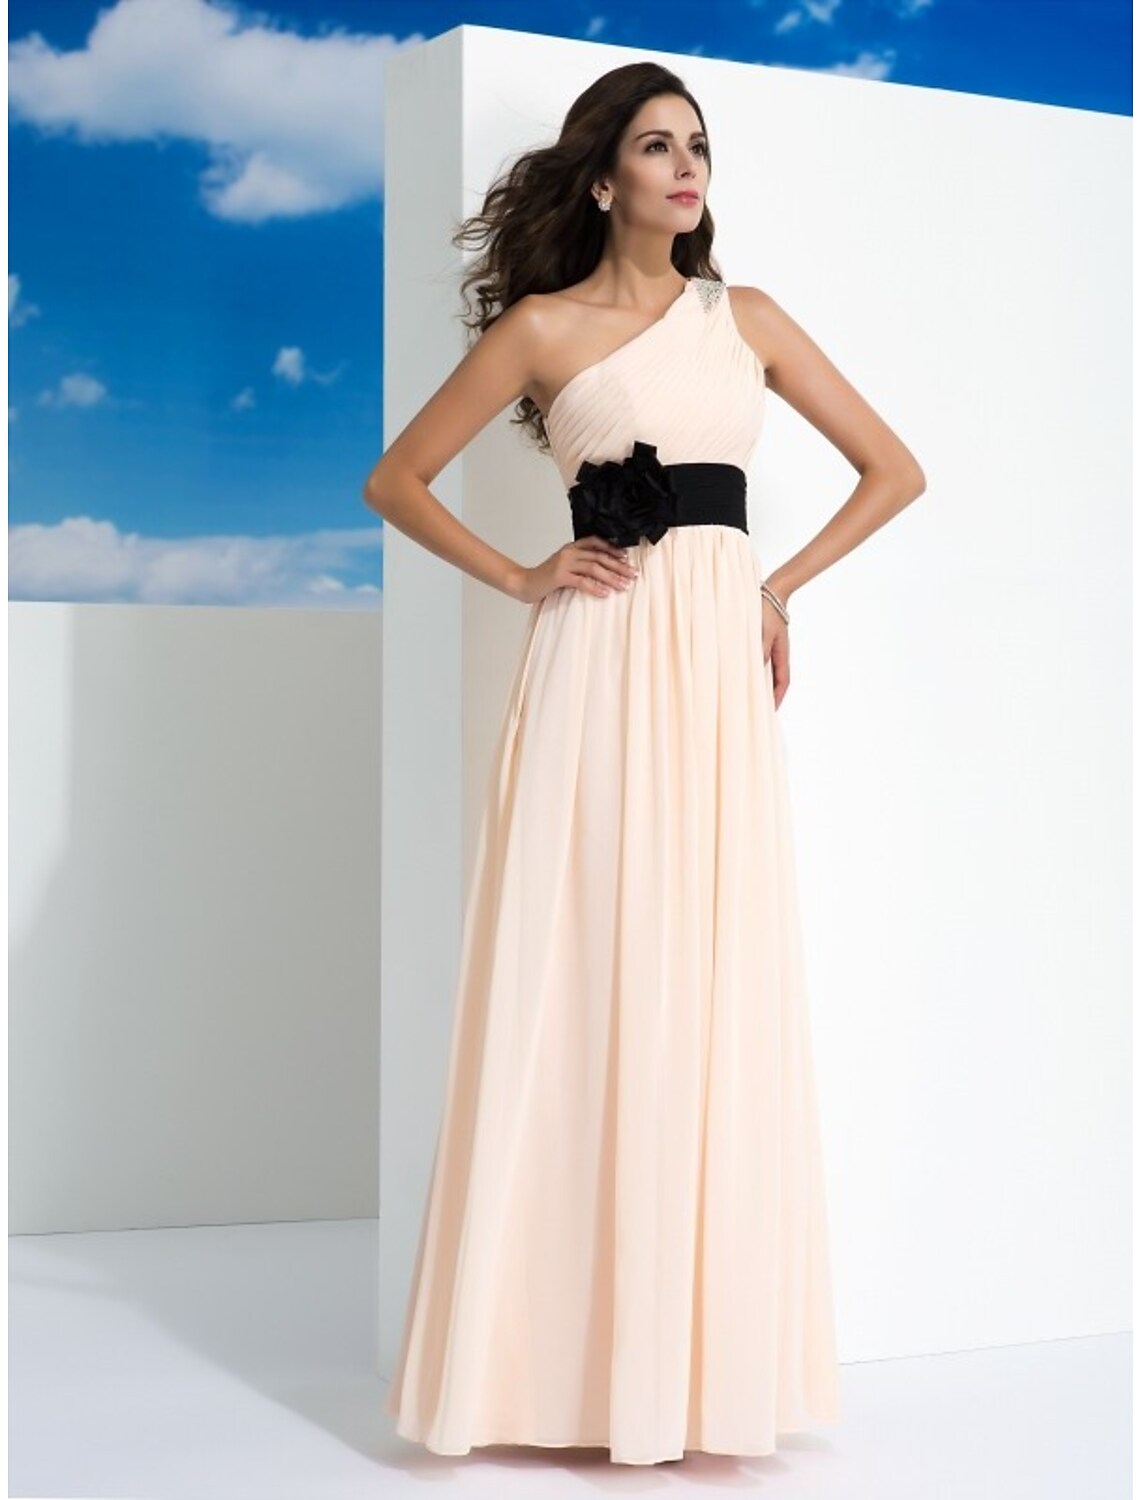 A-Line Prom Dresses Party Wear Floor Length Sleeveless One Shoulder Belt Sash Chiffon with Belt Ruched